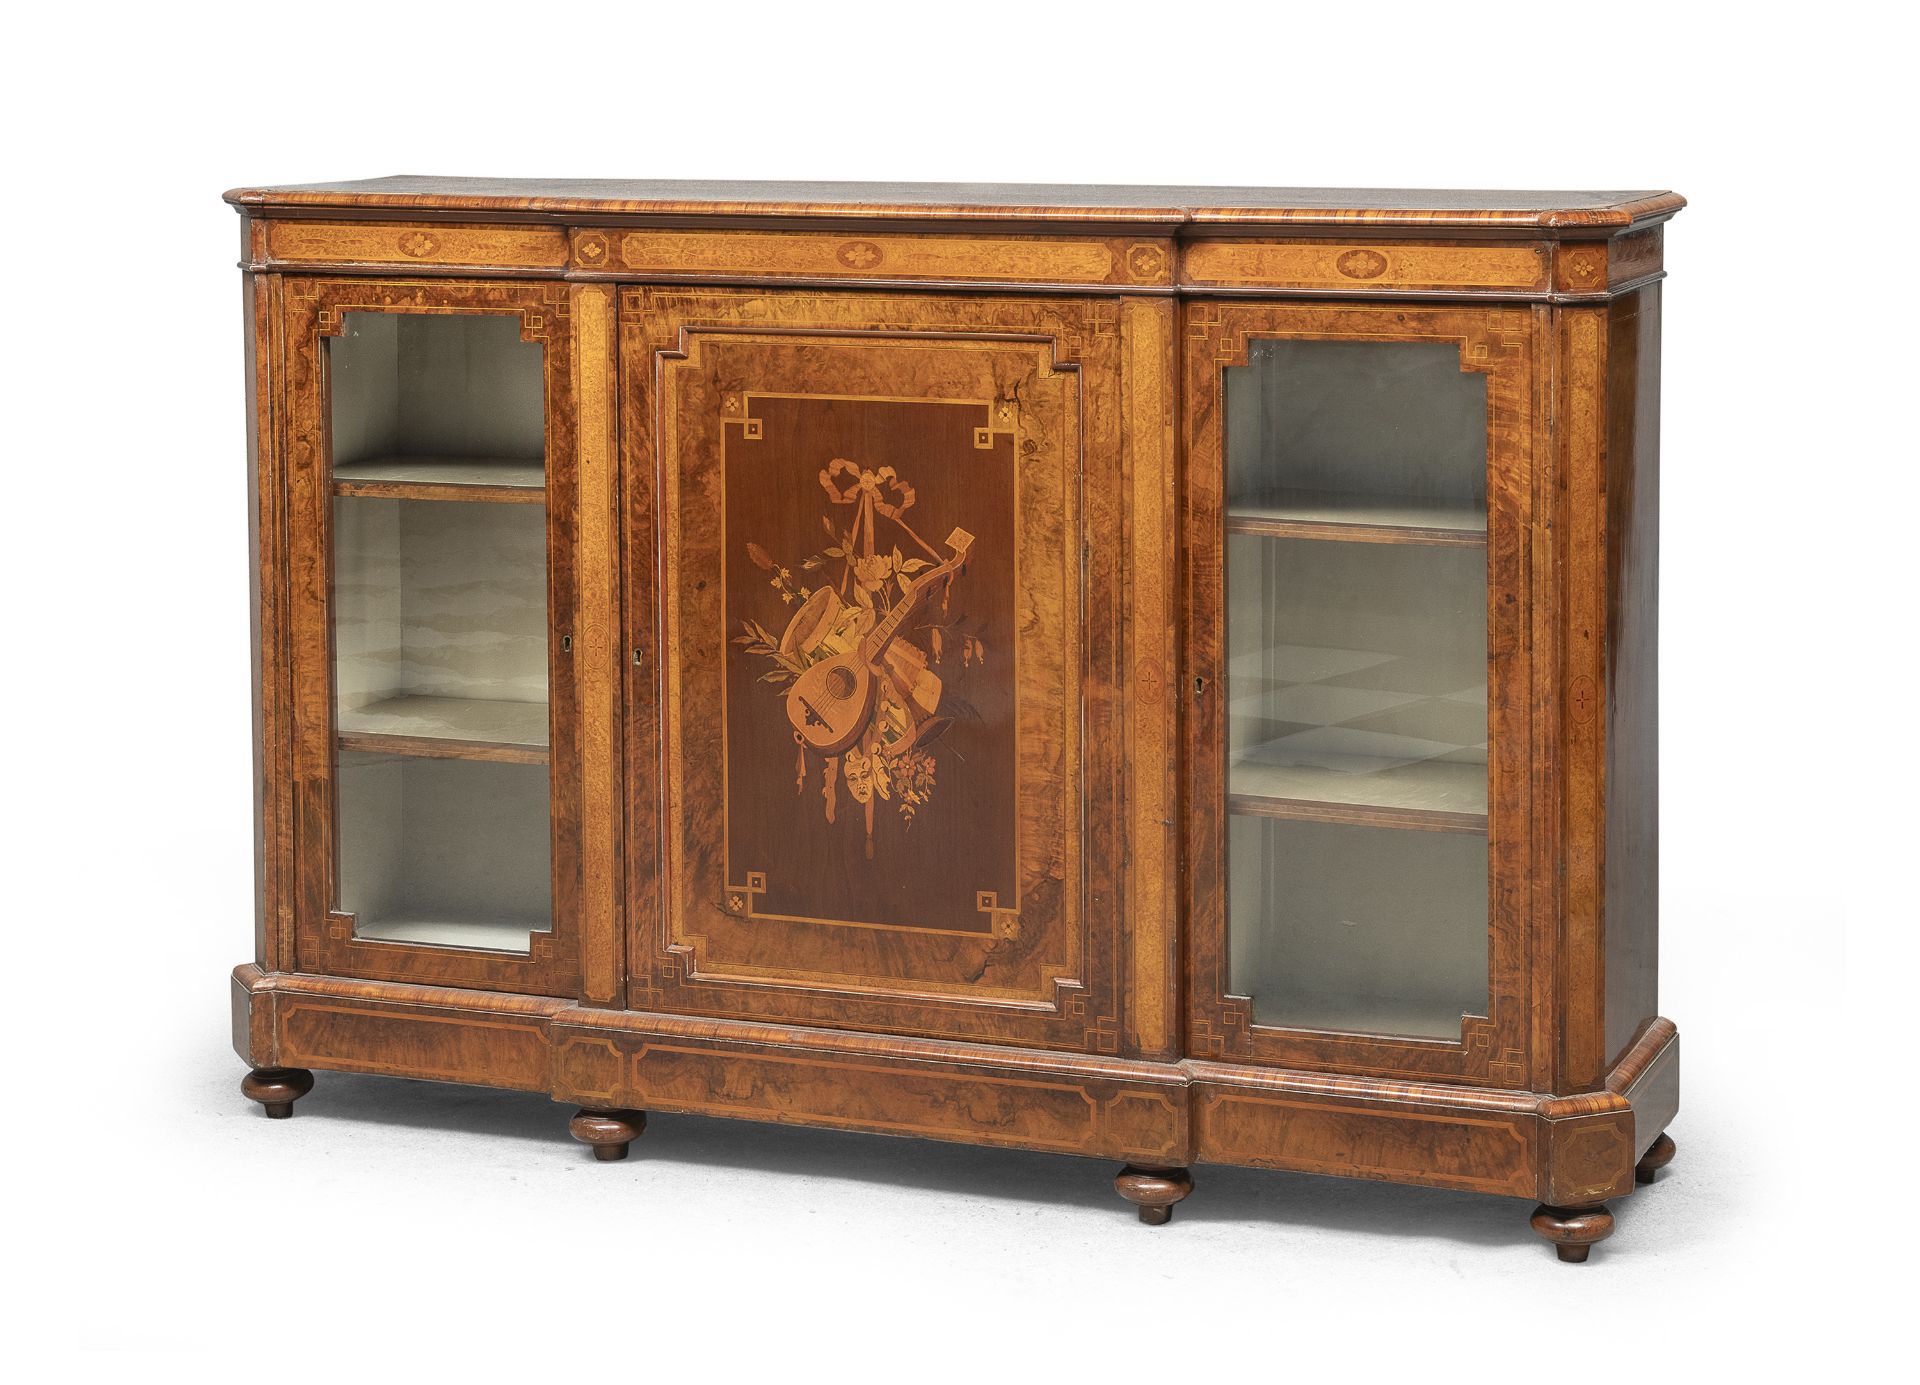 OLIVE BRIAR GLASS DOOR SIDEBOARD 19th CENTURY FRANCE